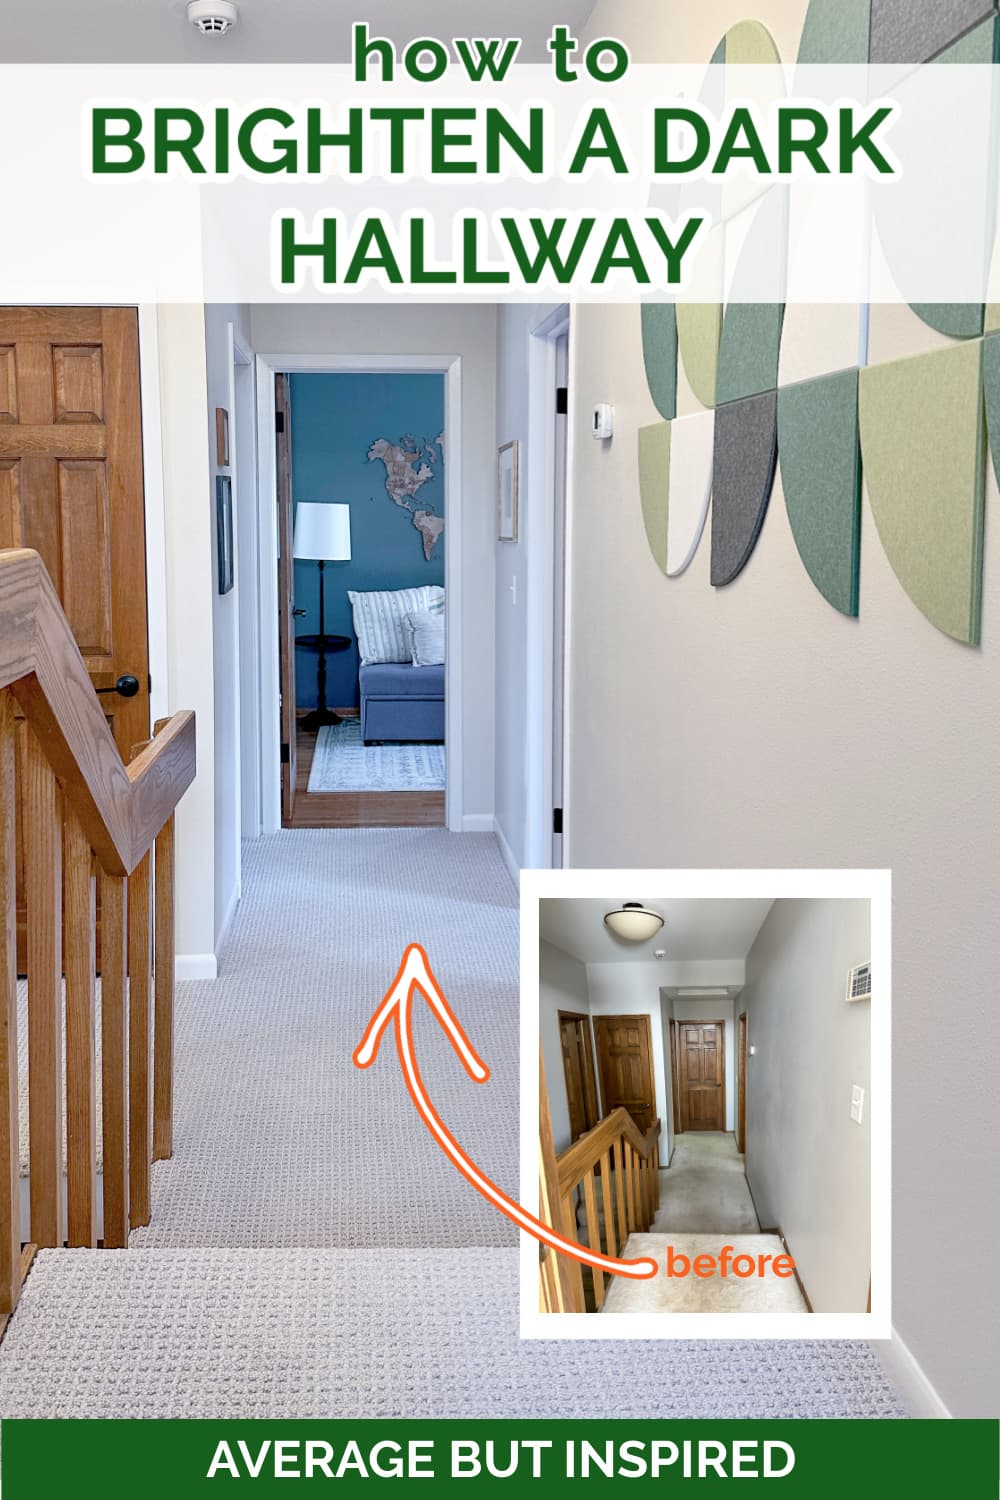 If you want to brighten a dark hallway, here are some great ideas! There are many ways to make a dark hallway look brighter and lighter, even if you don't have any natural light coming in.